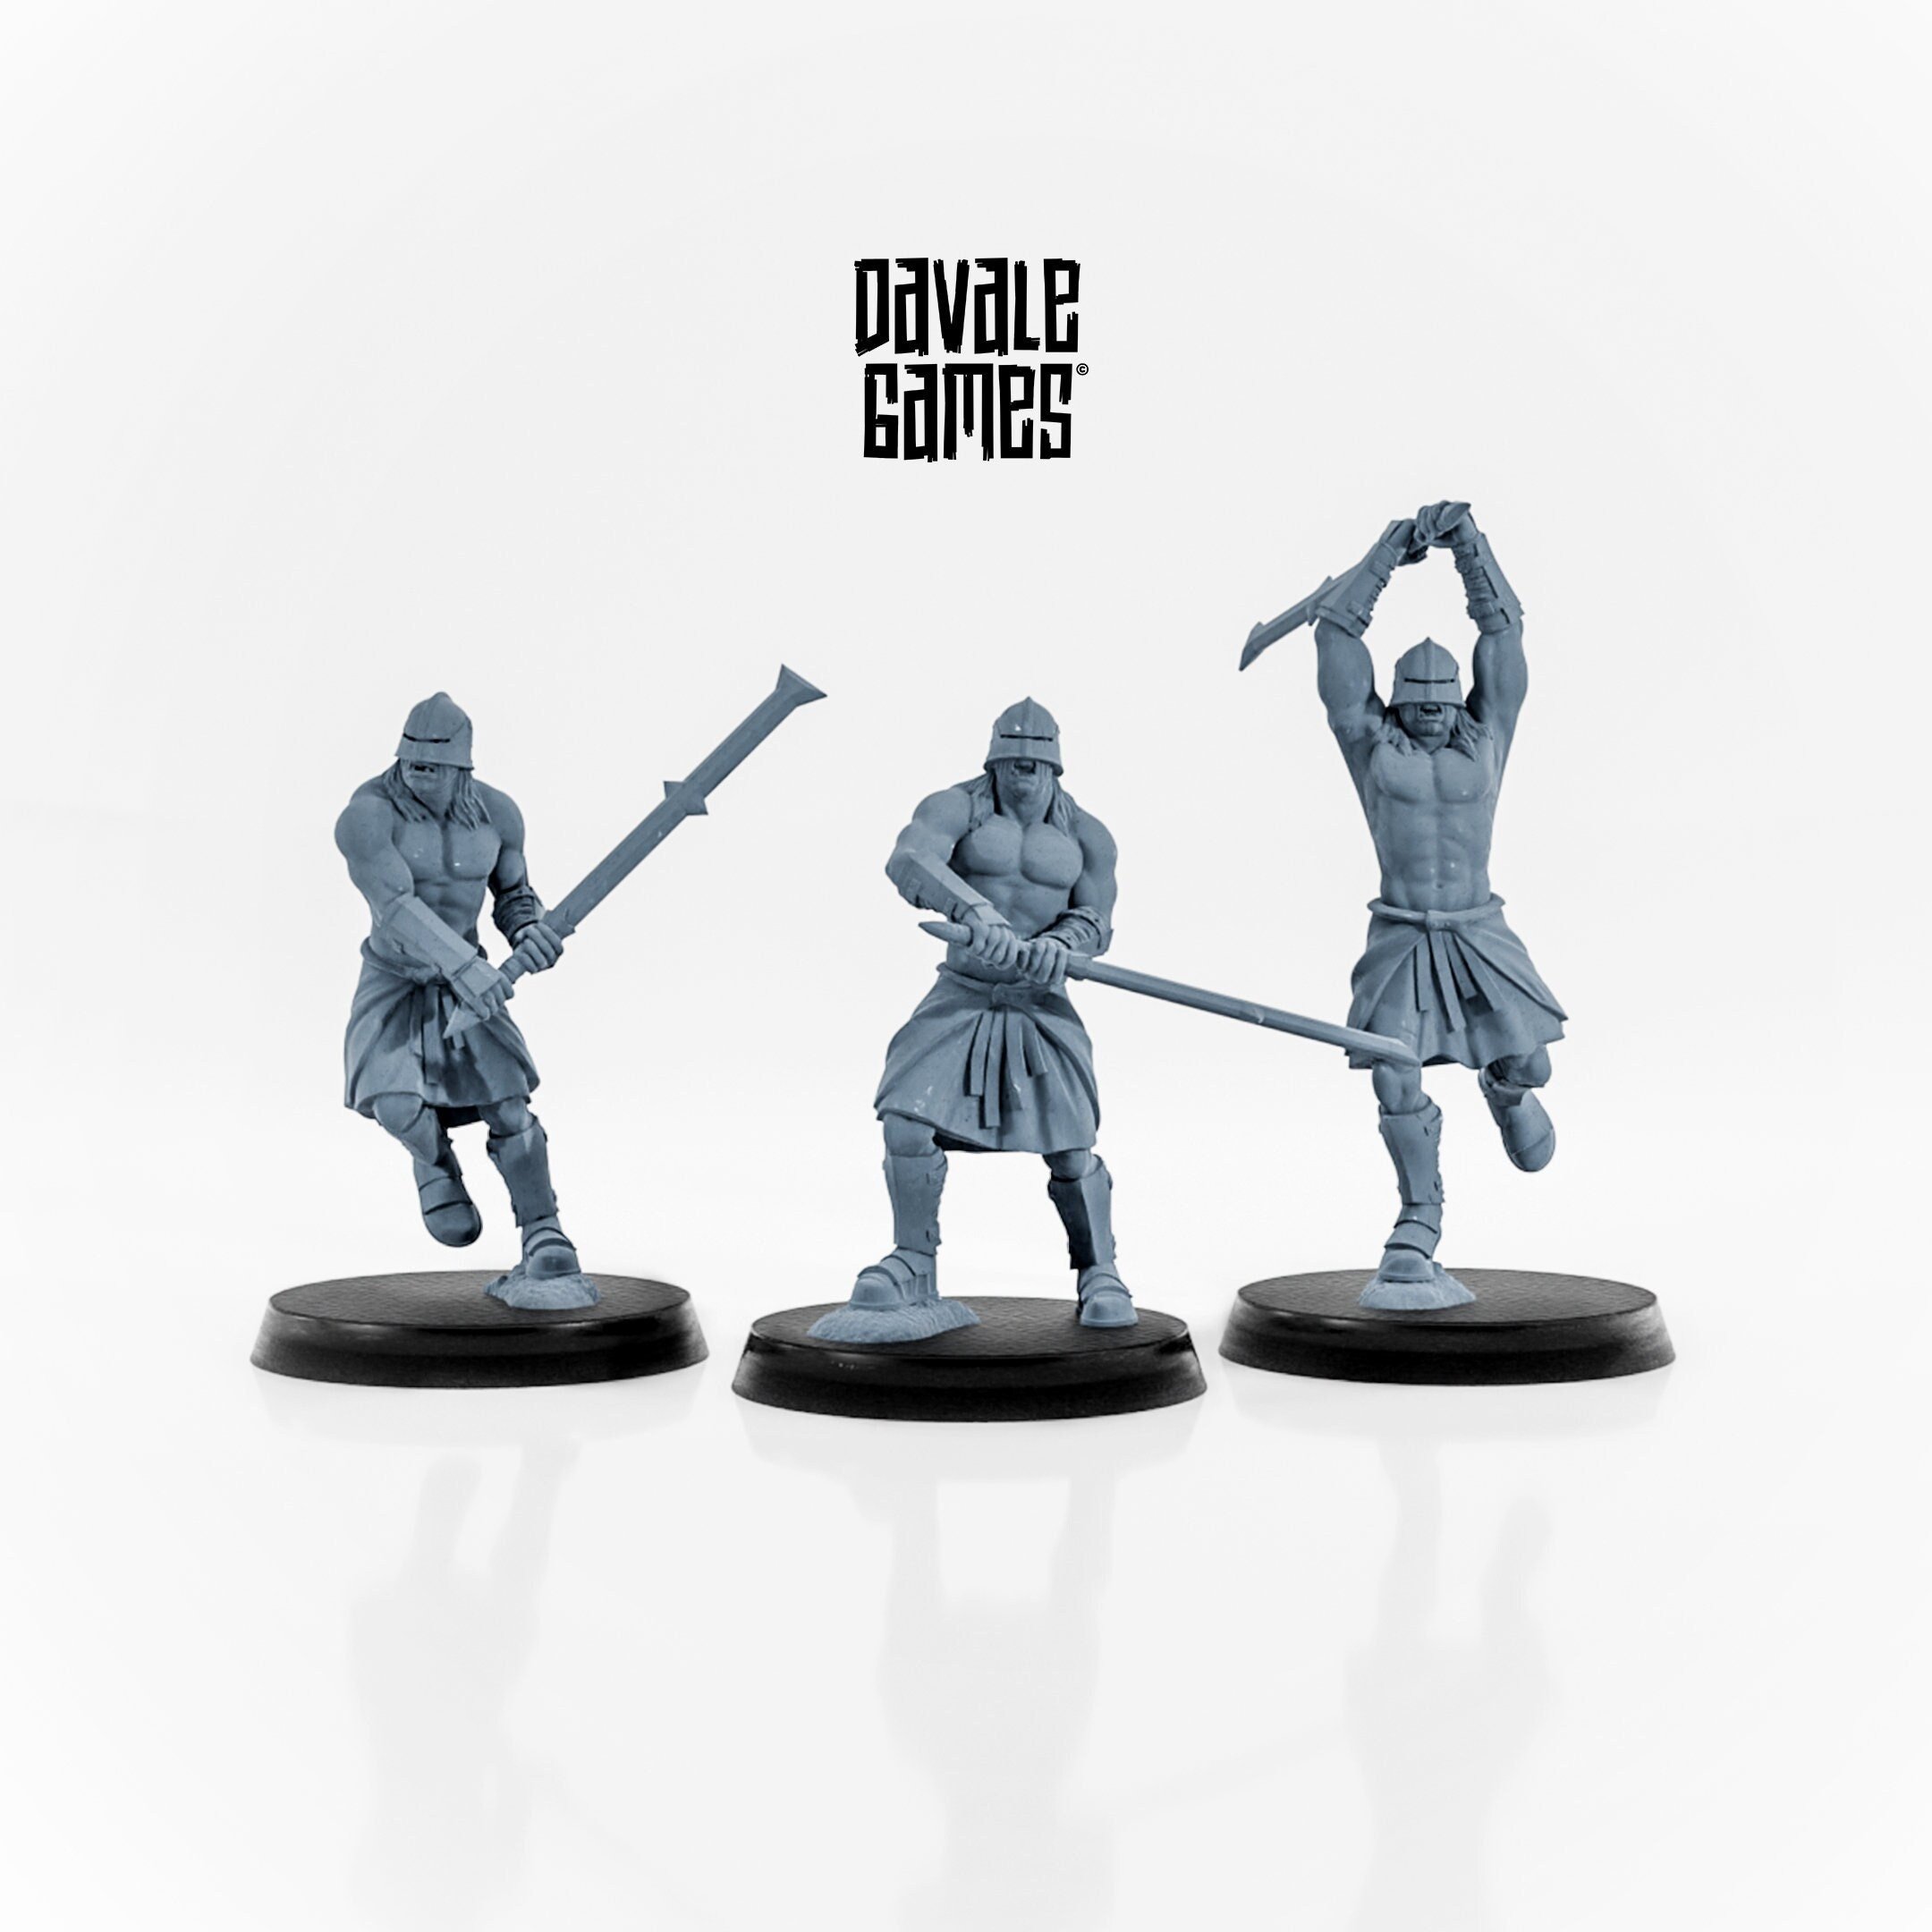 Blood Hand Orc Berserkers wargaming miniatures by Davale Games 3D Printed by Forgemaster Miniatures